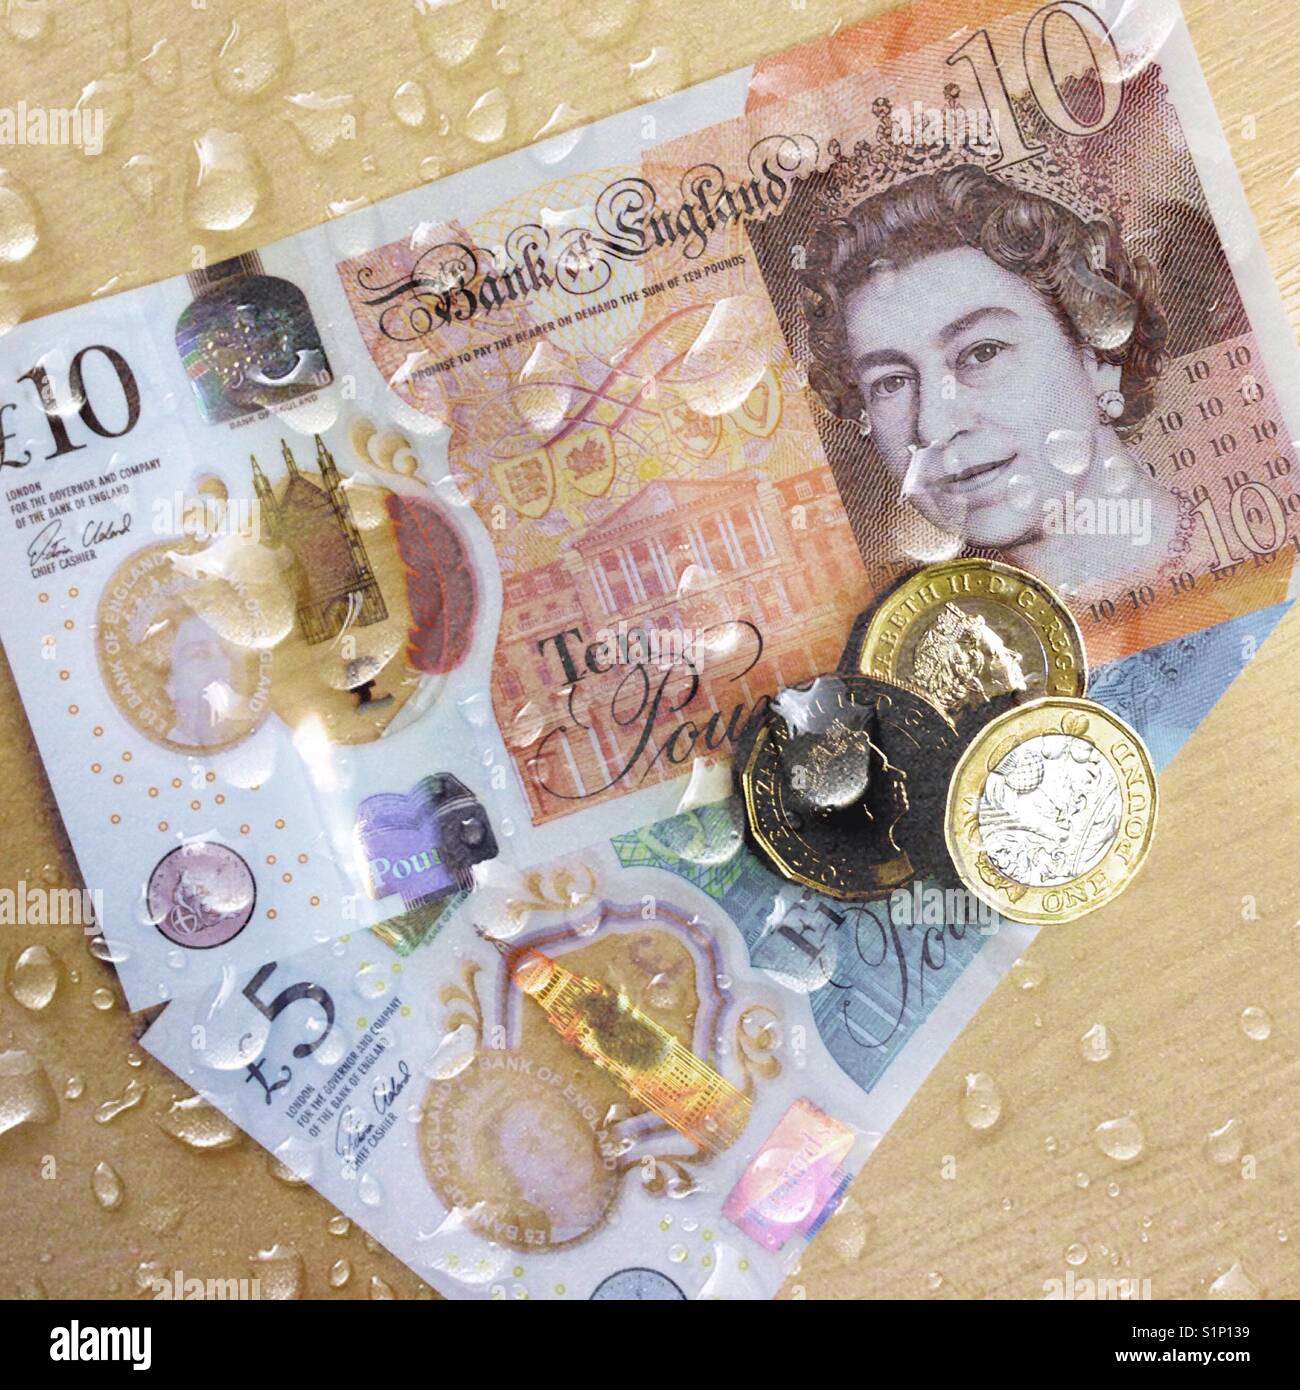 New £10 pounds note Stock Photo